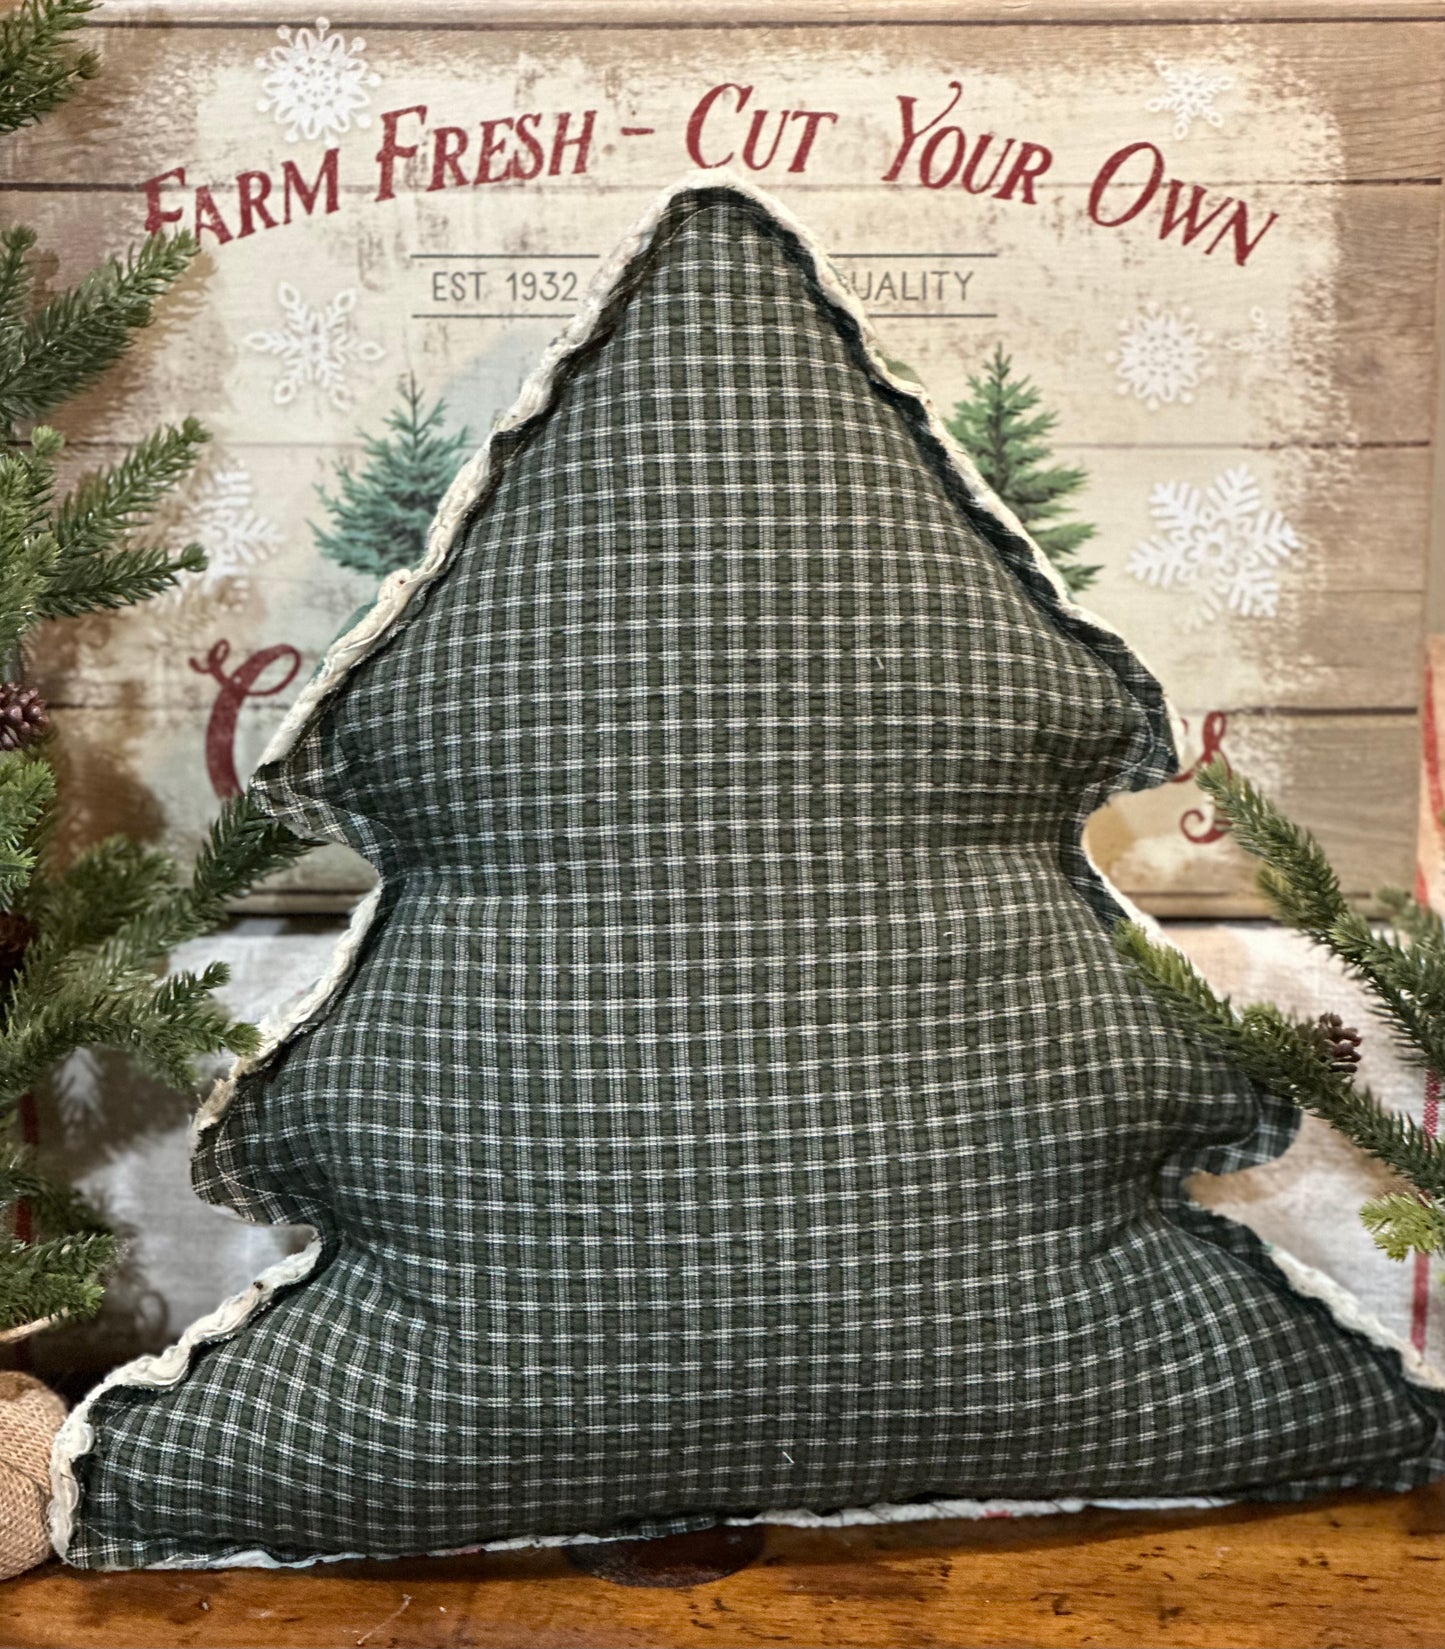 Vintage Quilt Christmas Tree Pillow with Pocket